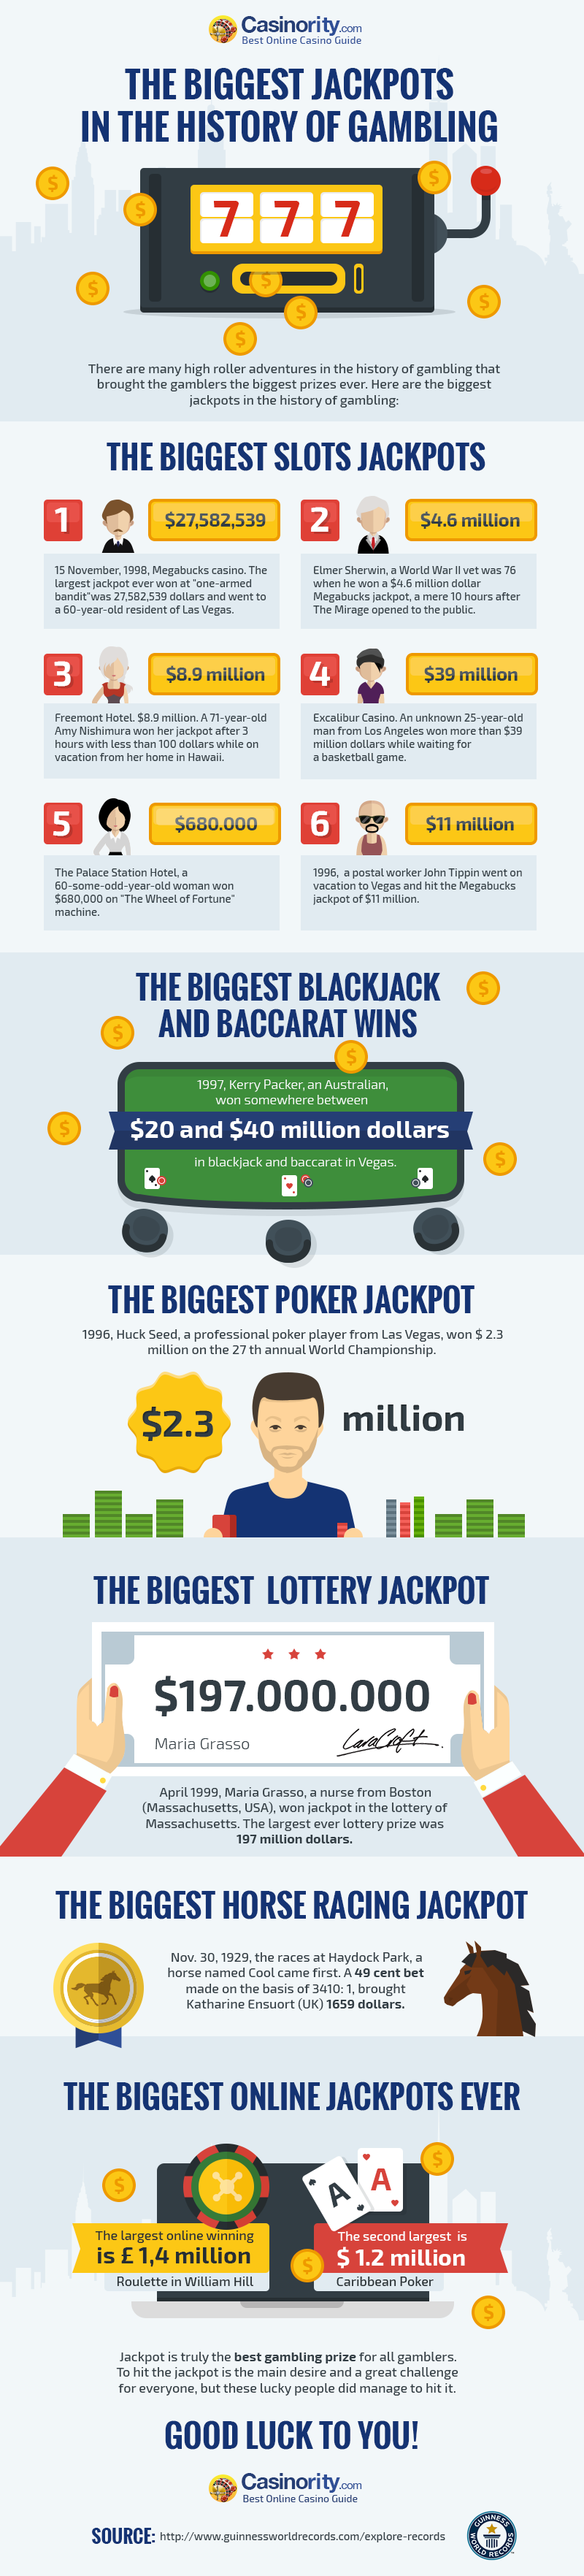 The Biggest Jackpots in the History of Gambling by Casinority.com